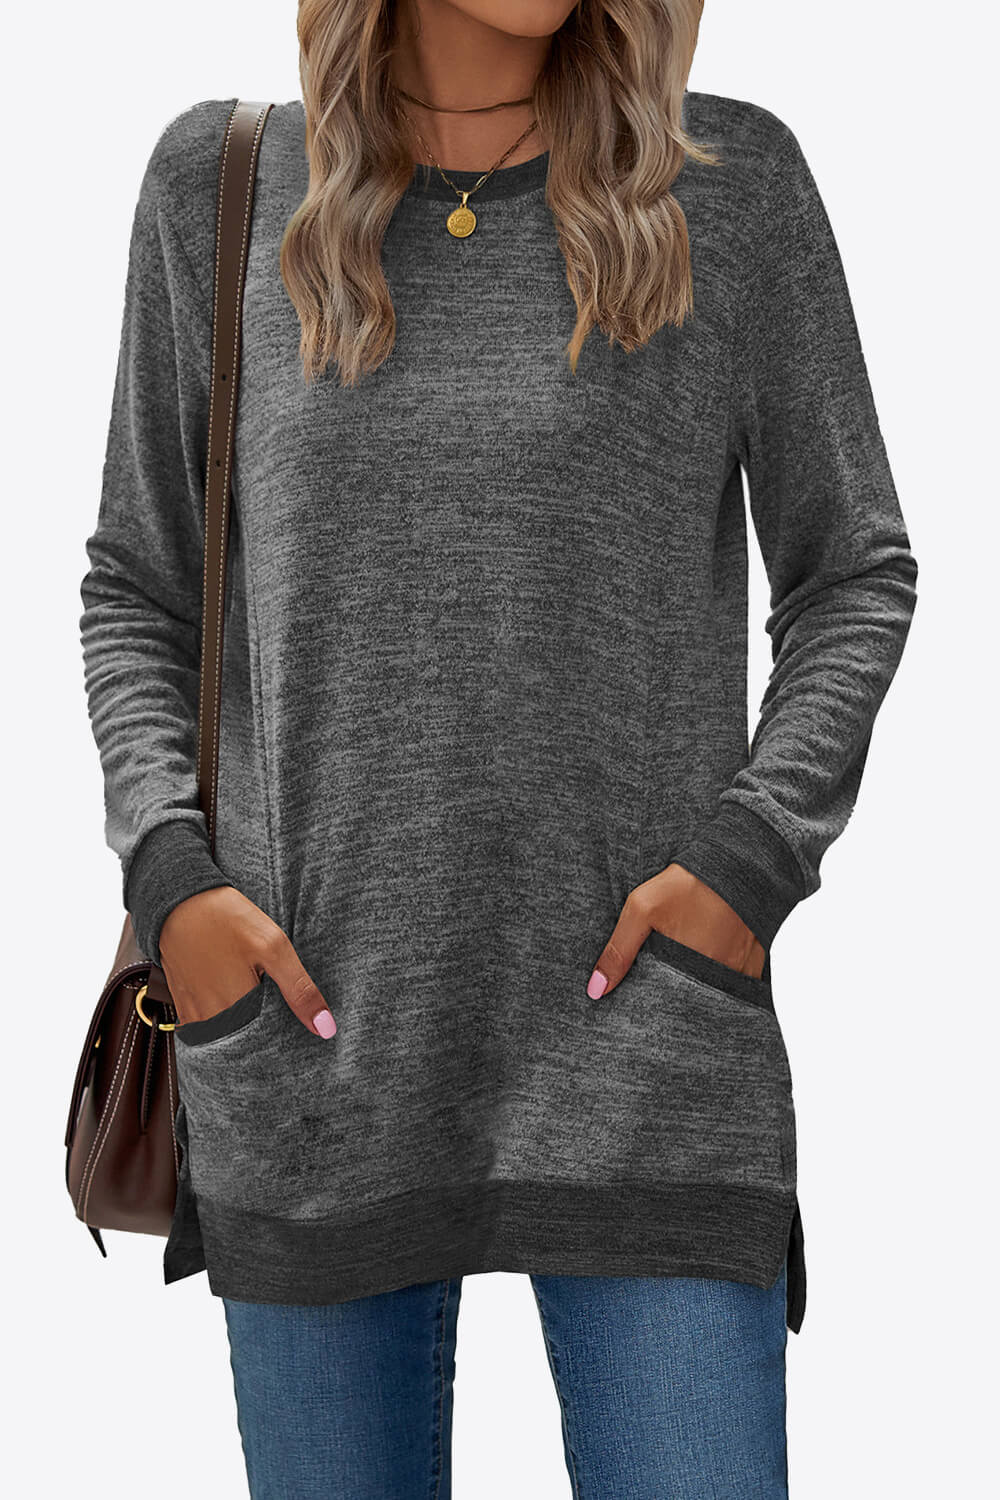 Heathered Slit Top with Pockets - T-Shirts - Shirts & Tops - 29 - 2024